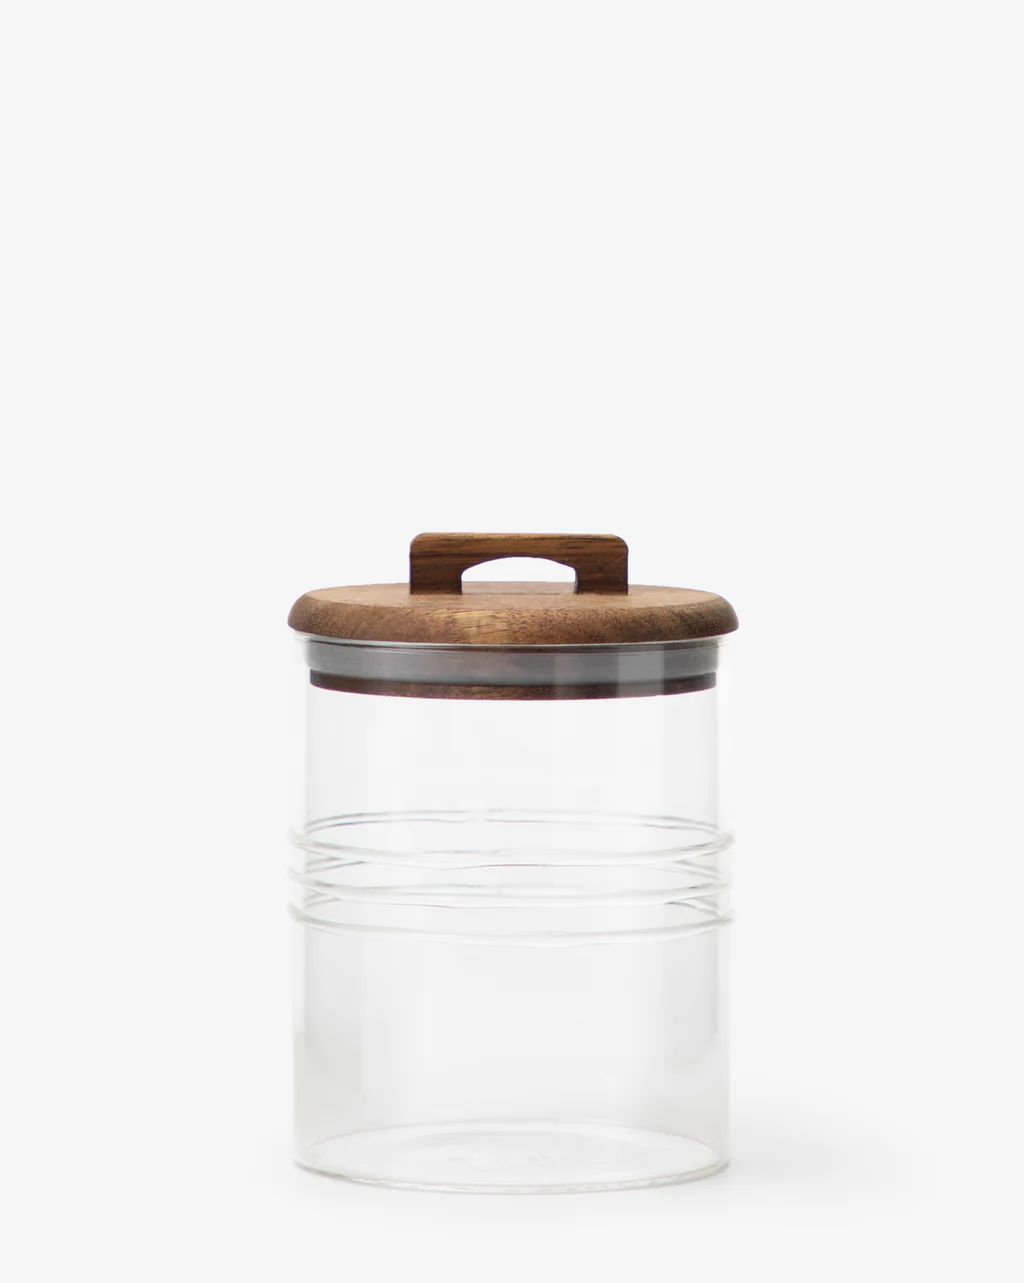 Winfield Canister | McGee & Co.